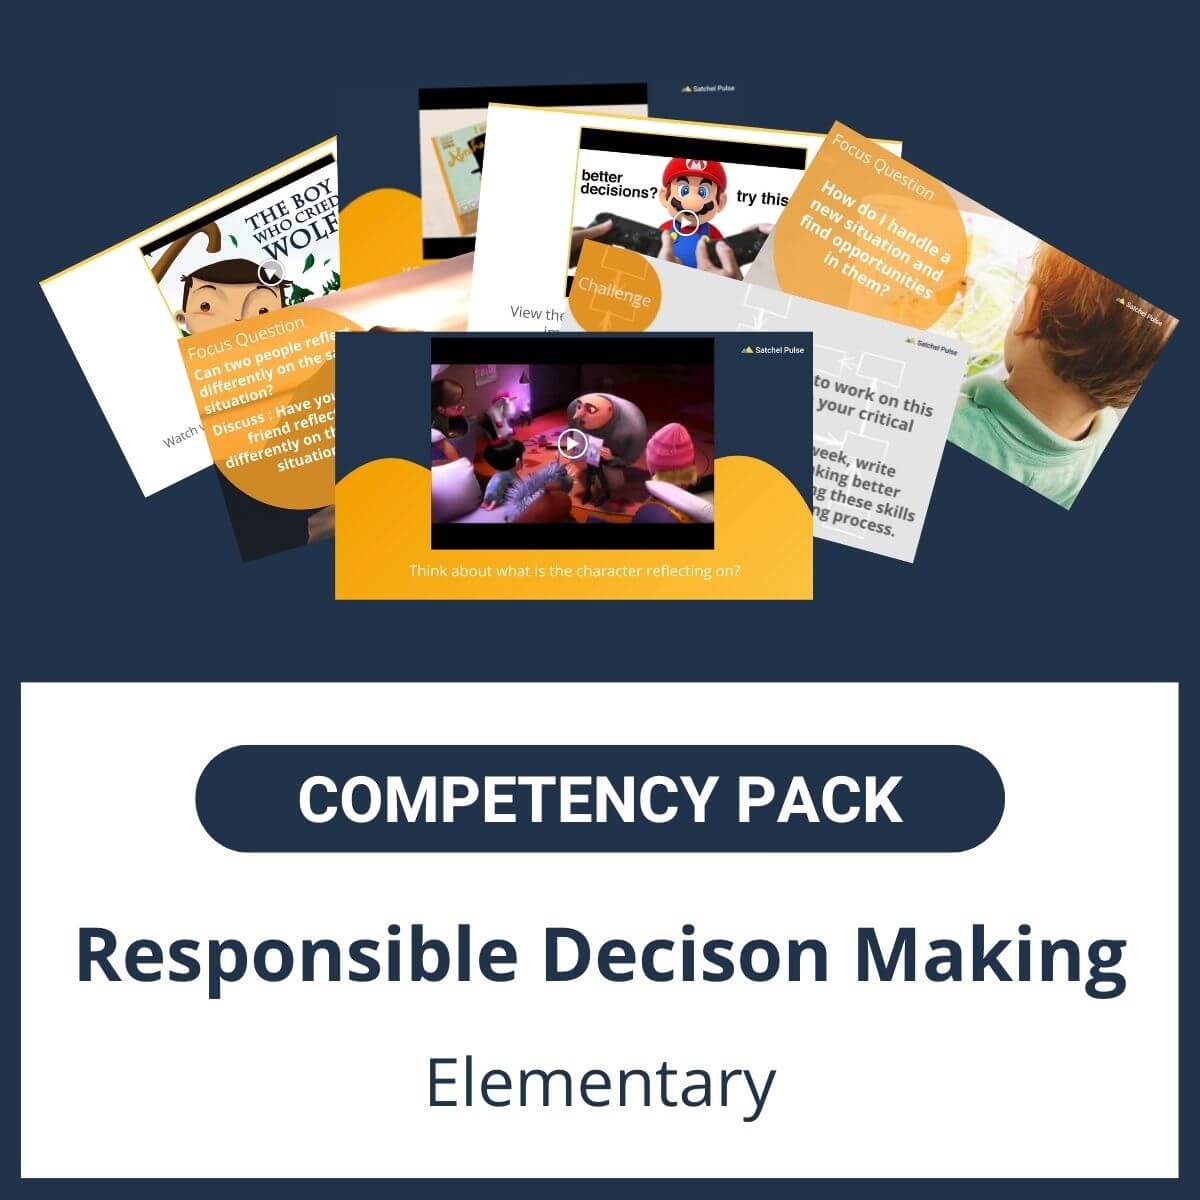 This SEL Resource pack for "Responsible Decision-Making" competency includes a range of SEL activities such as SEL lessons and self-studies